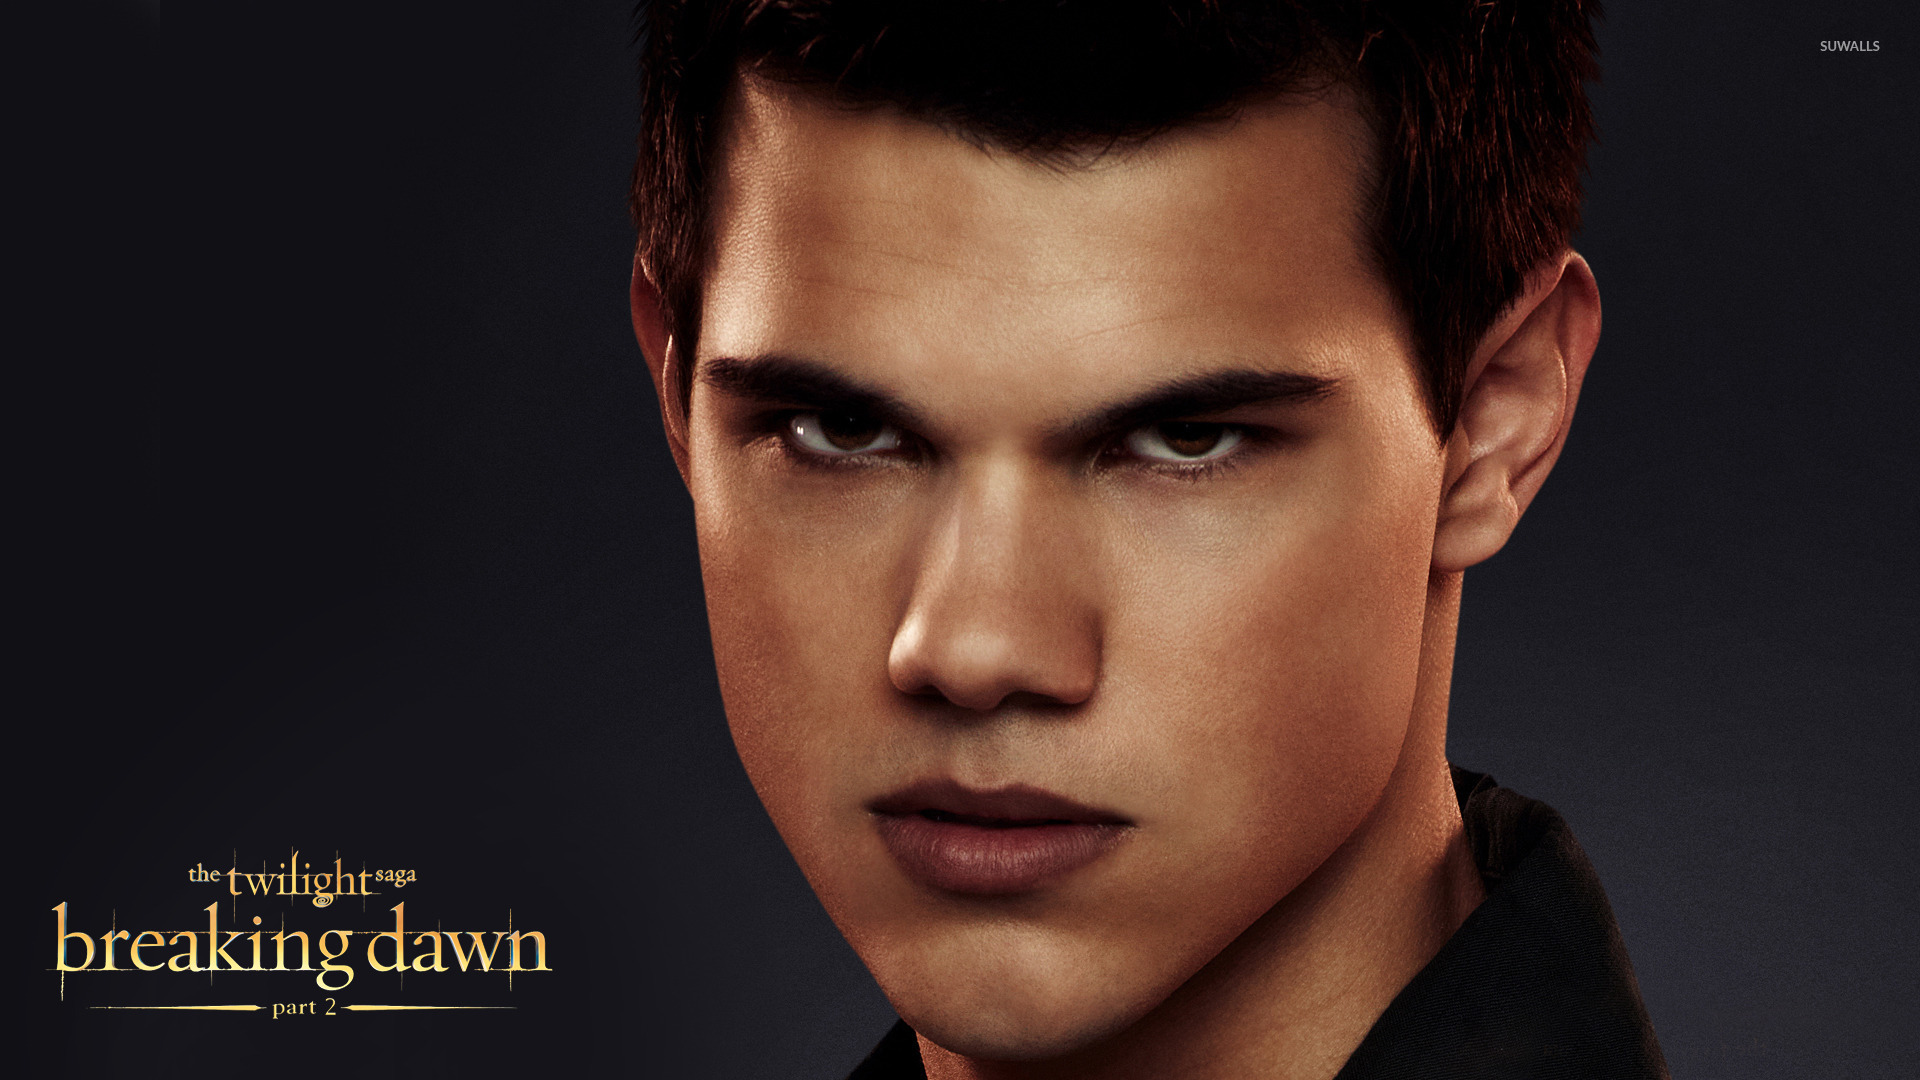 download the new version for apple The Twilight Saga: Breaking Dawn, Part 2